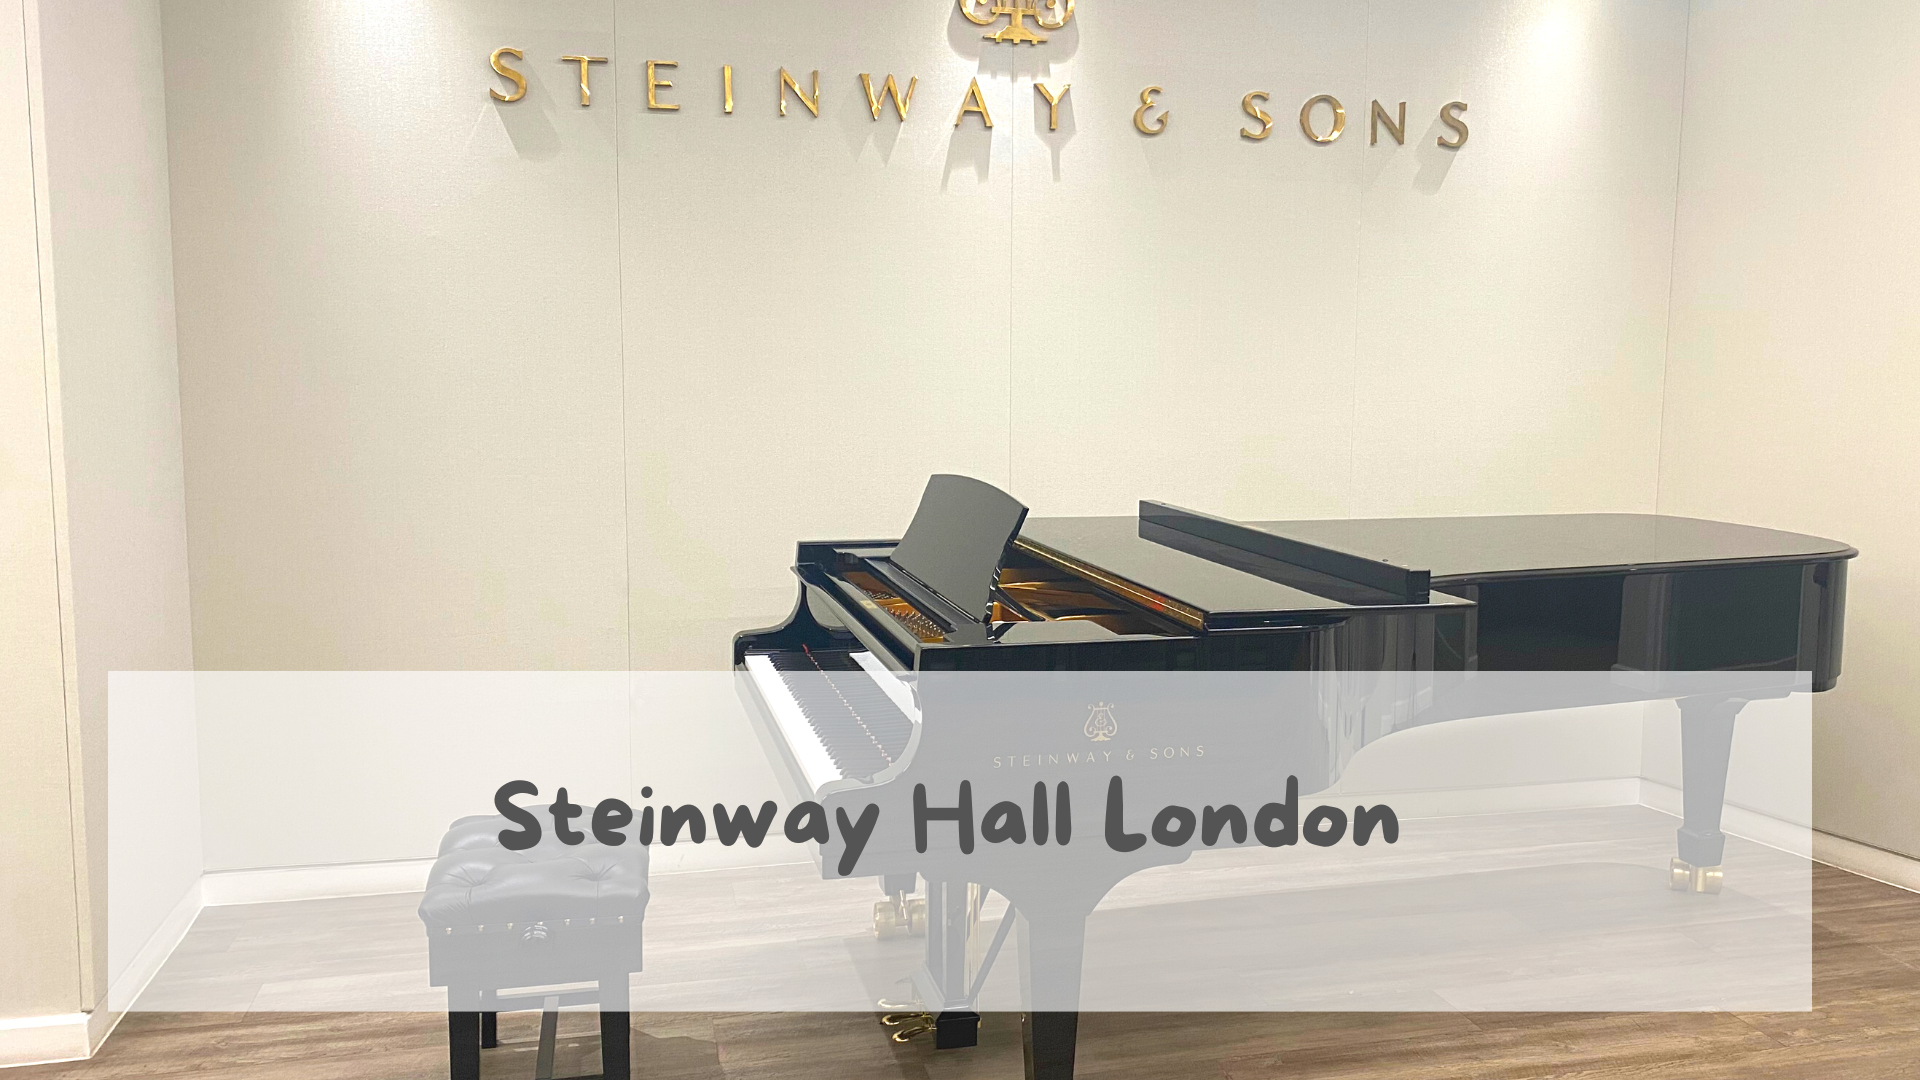 We were delighted to be able to visit the iconic Steinway Hall in London and to see lots of beautiful pianos made by Steinway & Sons.